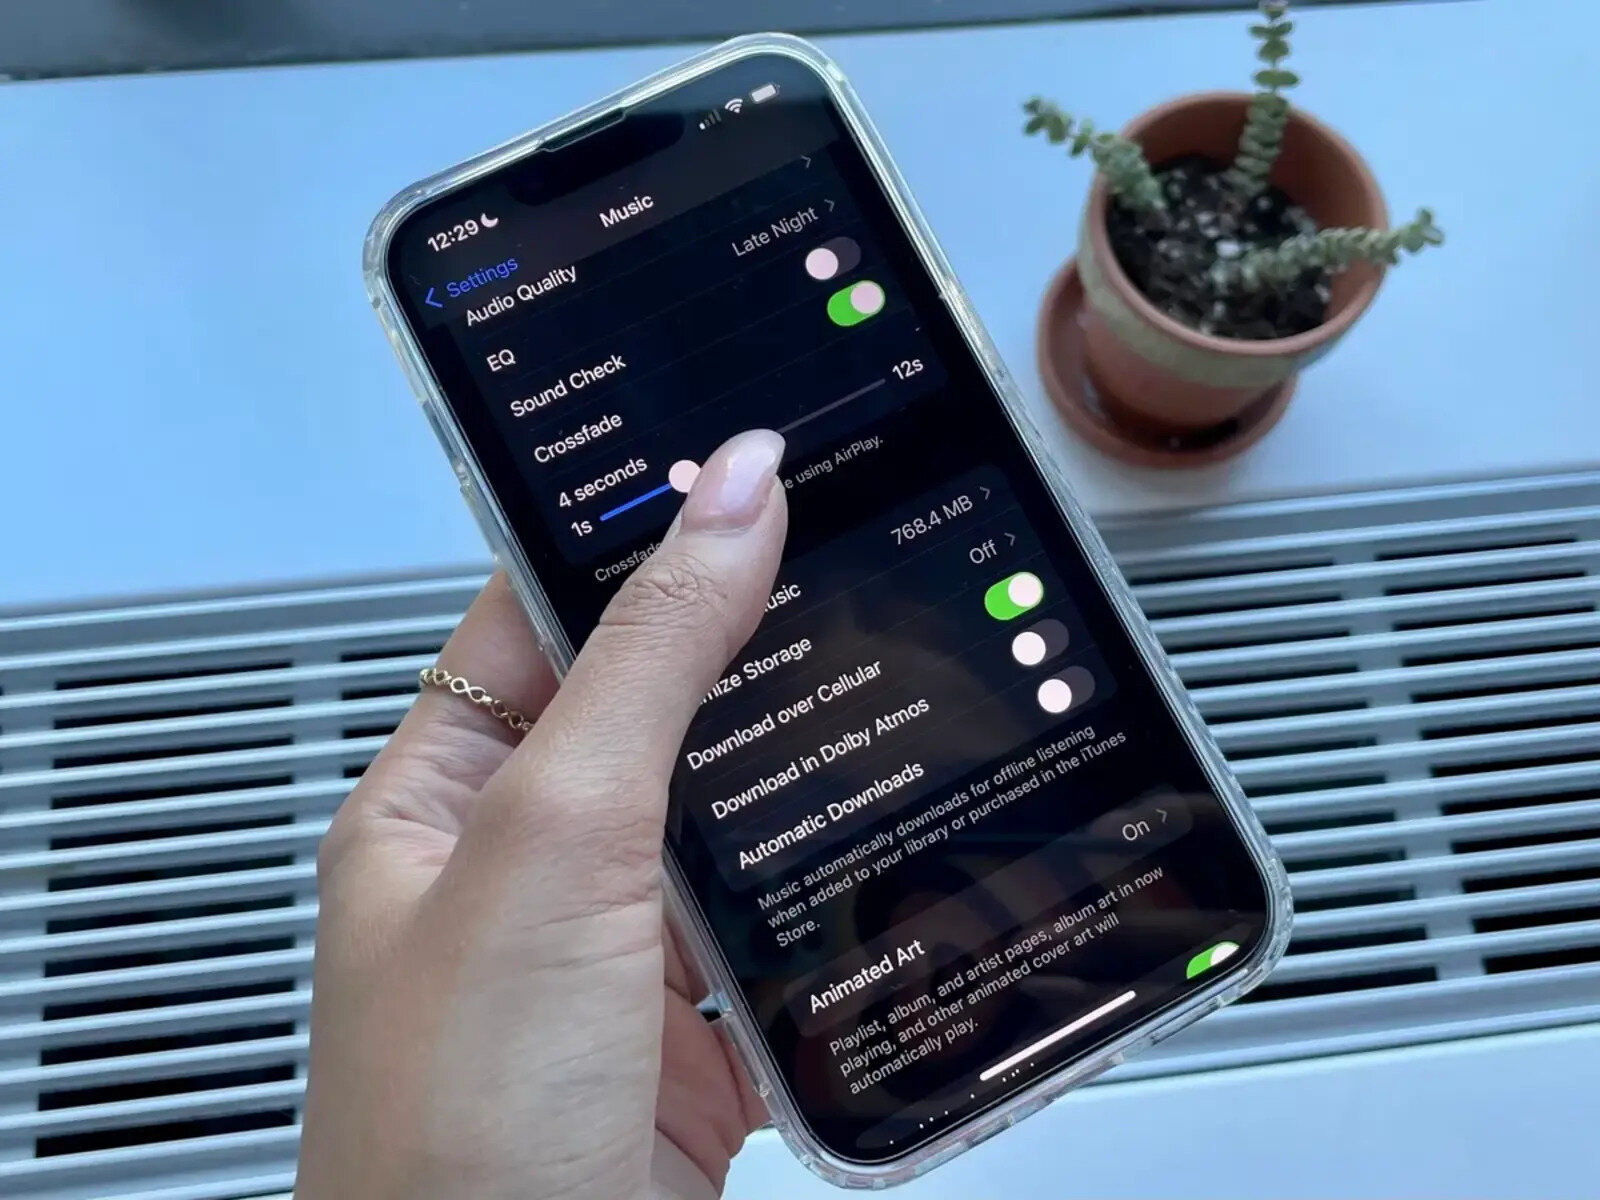 Auto-Play Control: Managing Automatic Music Playback When Connected To Bluetooth On IPhone